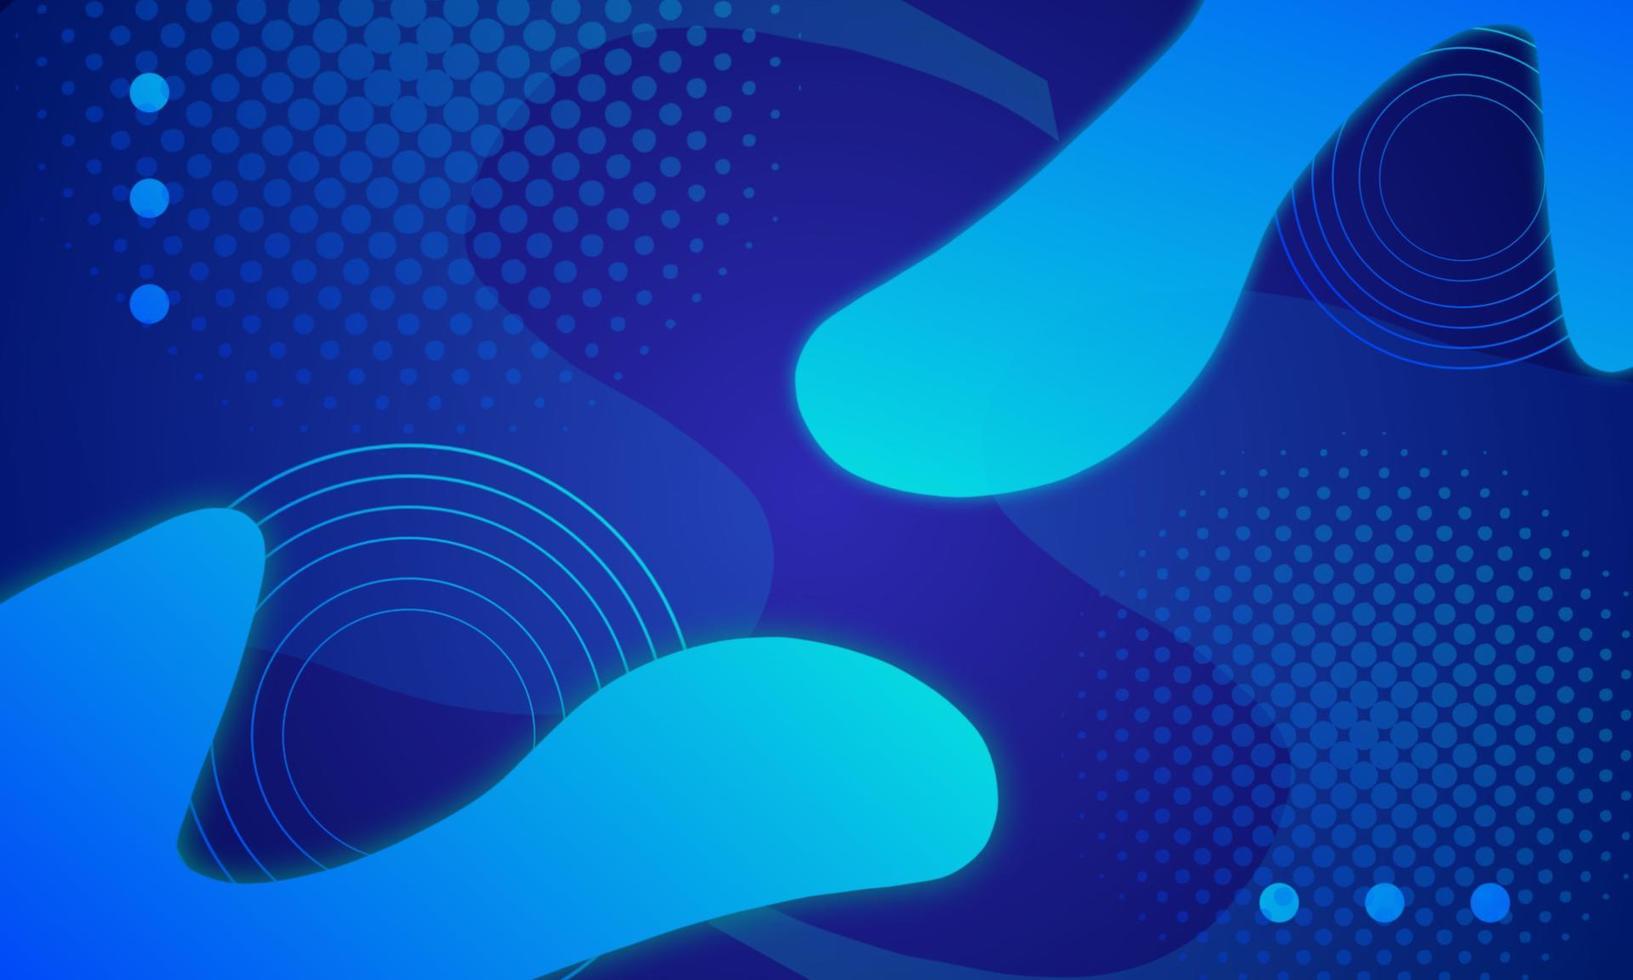 Blue abstract background can be used as a cover, poster, banner or something else vector